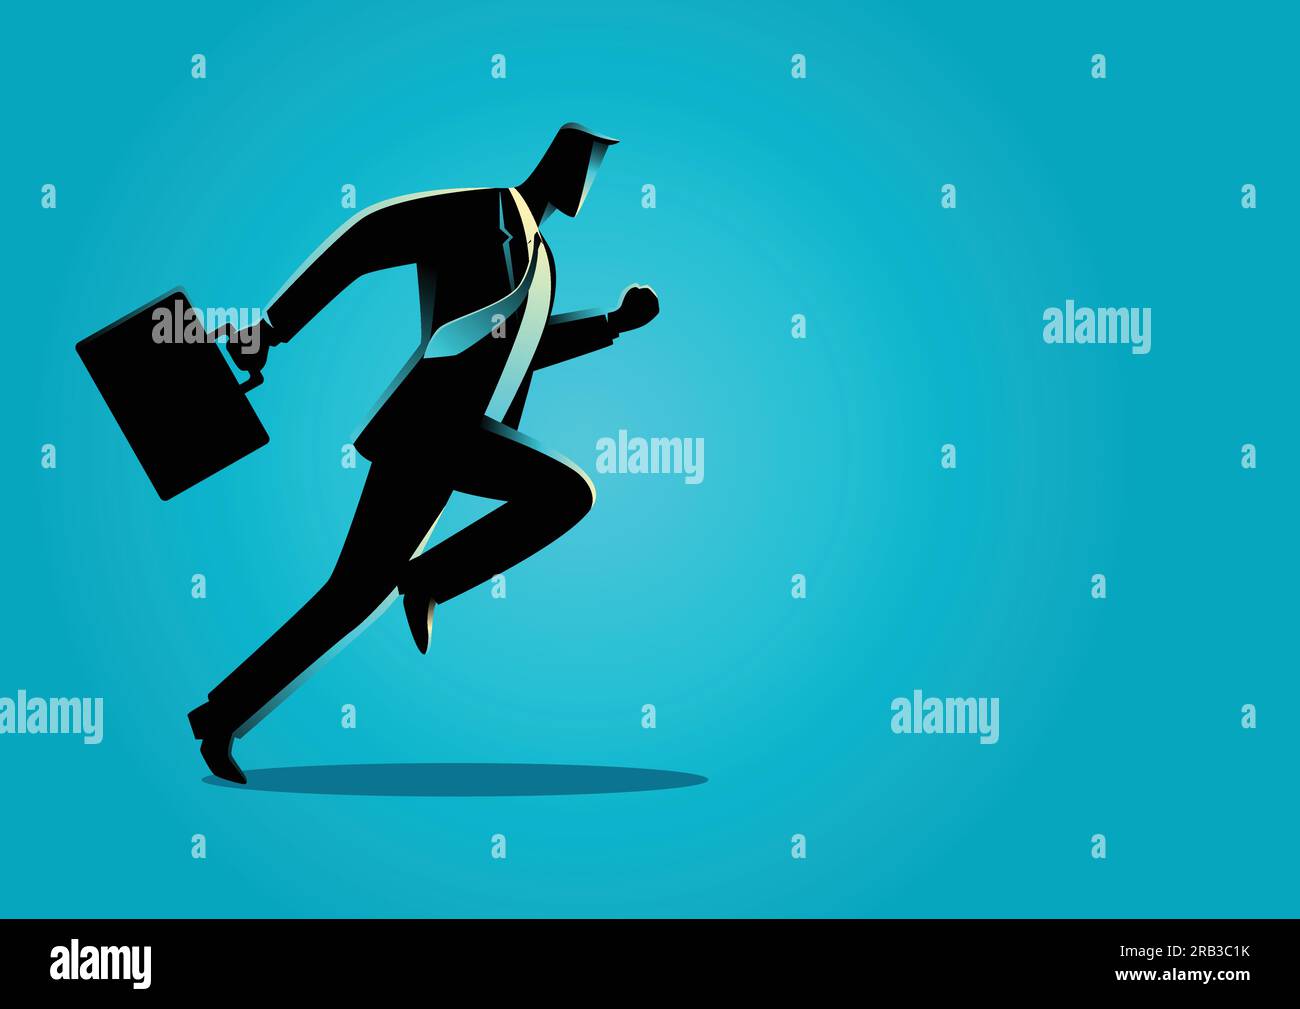 Silhouette illustration of a businessman running with briefcase, business, energetic, dynamic concept Stock Vector